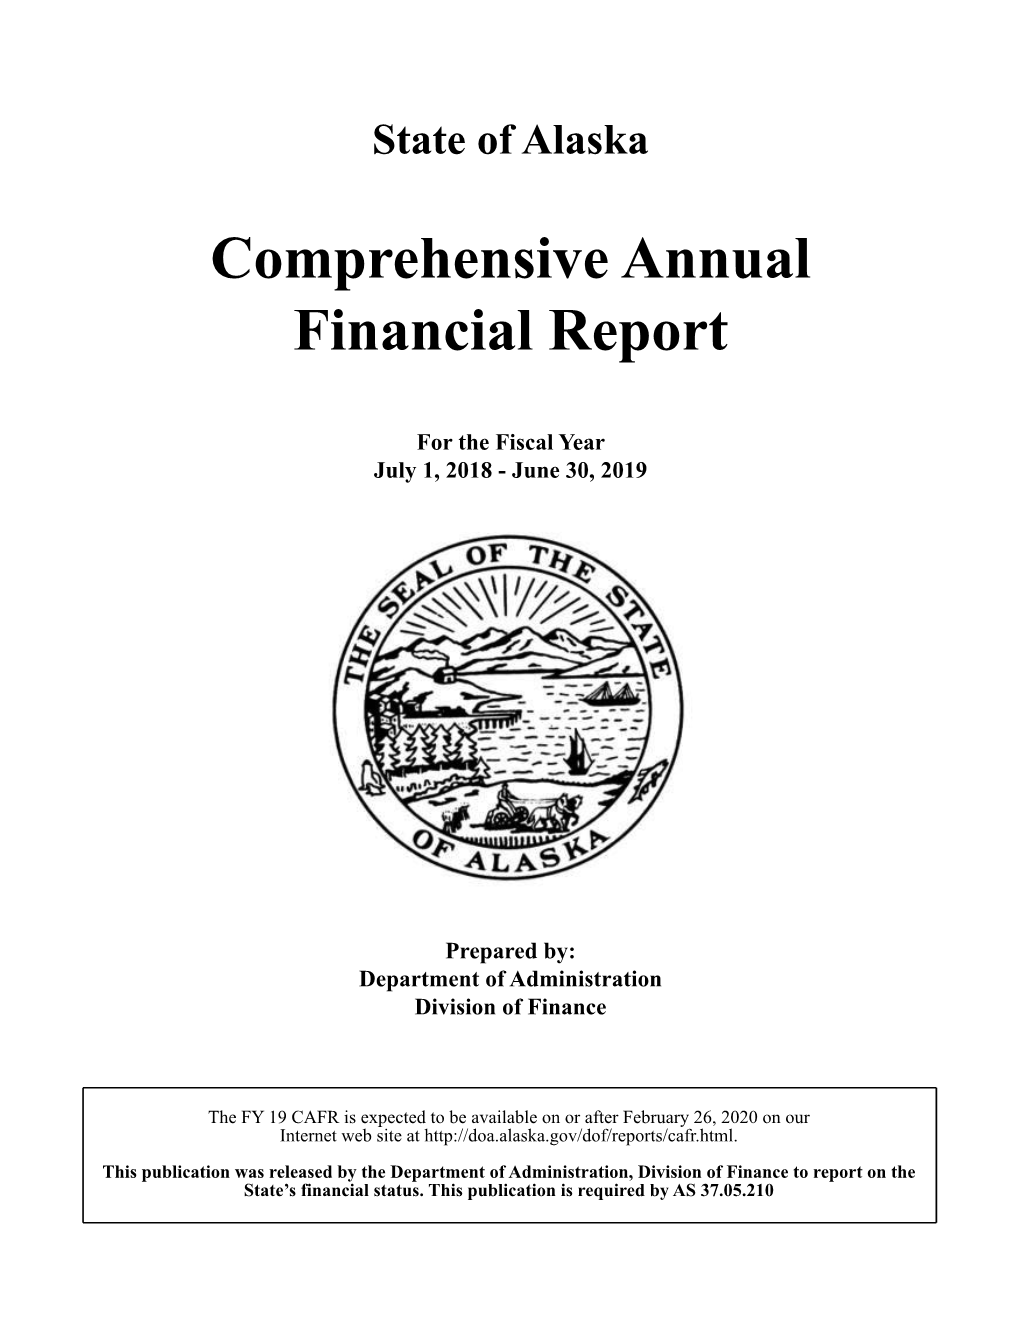 Comprehensive Accounting and Financial Report 2019